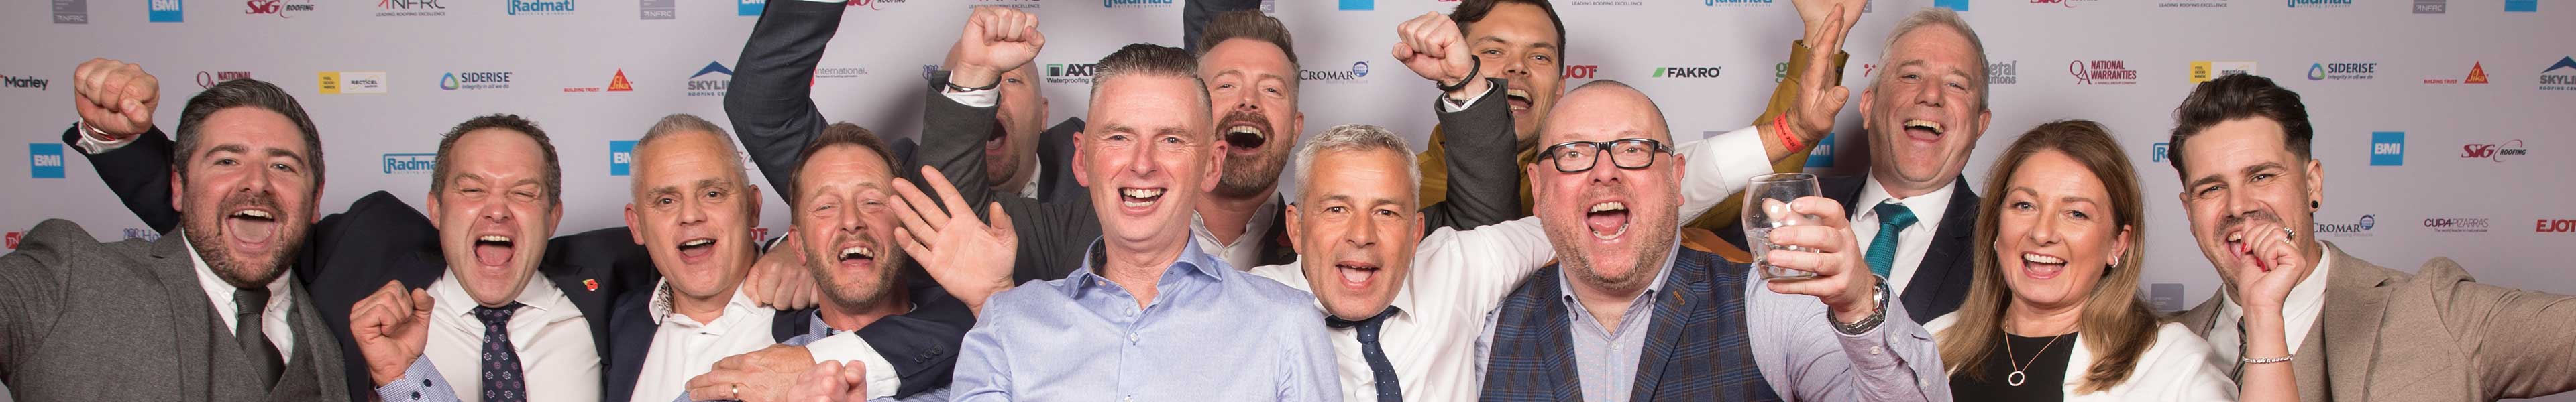 UK Roofing Awards 2021 winning roofing contractor